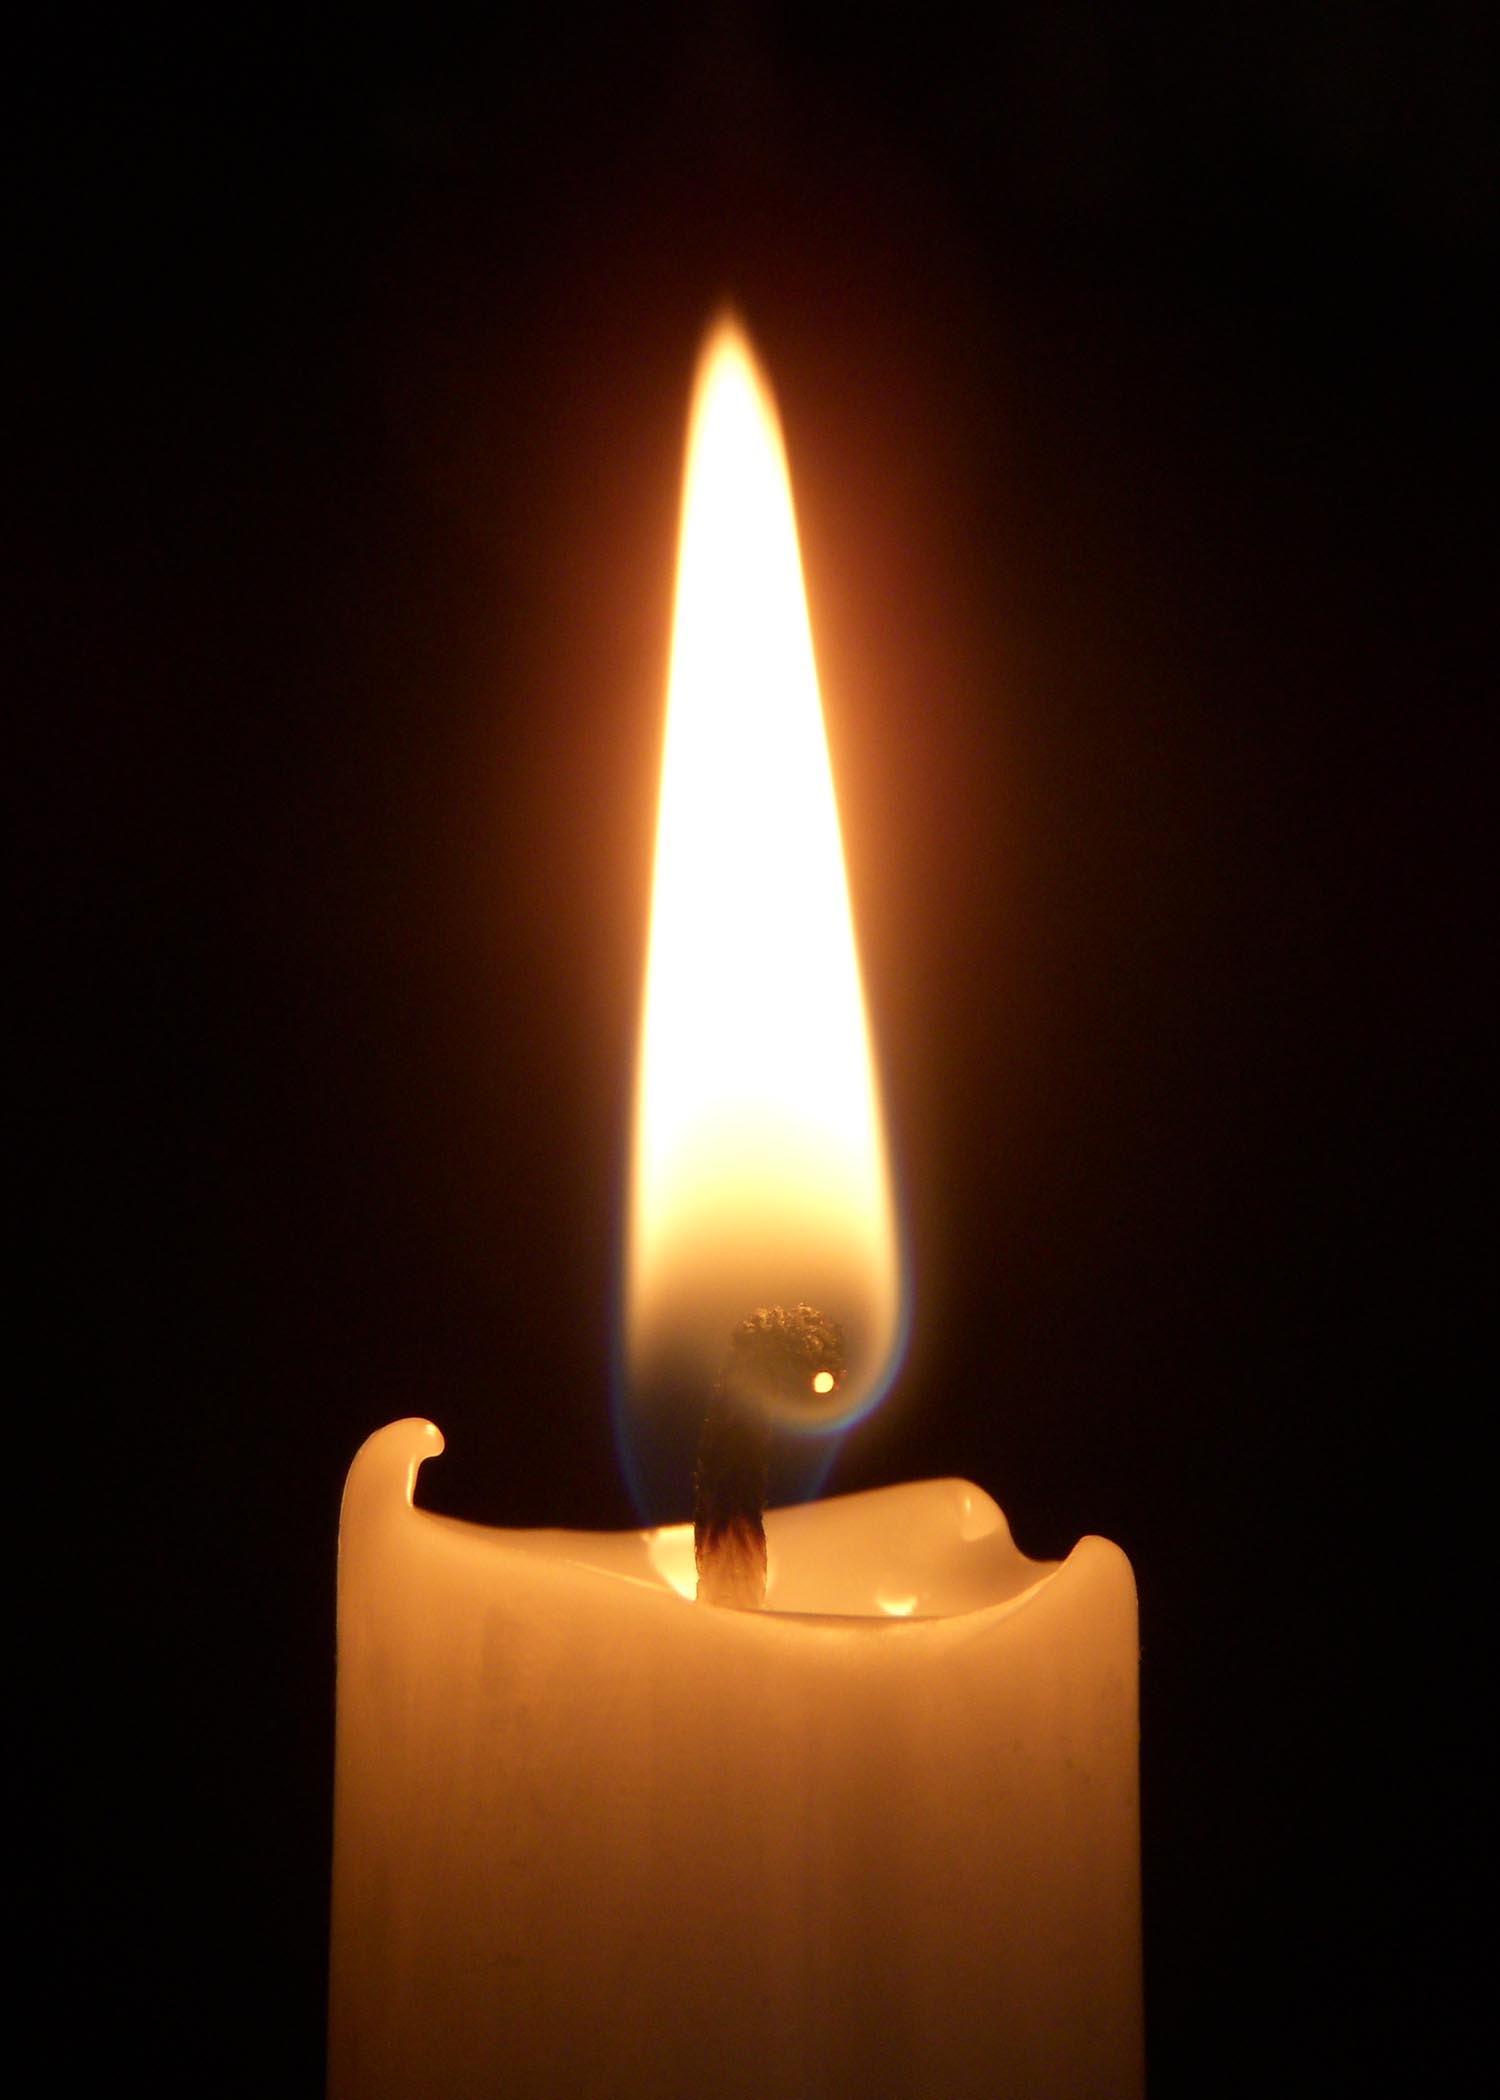 4. Candle Flame | The Meditation Express